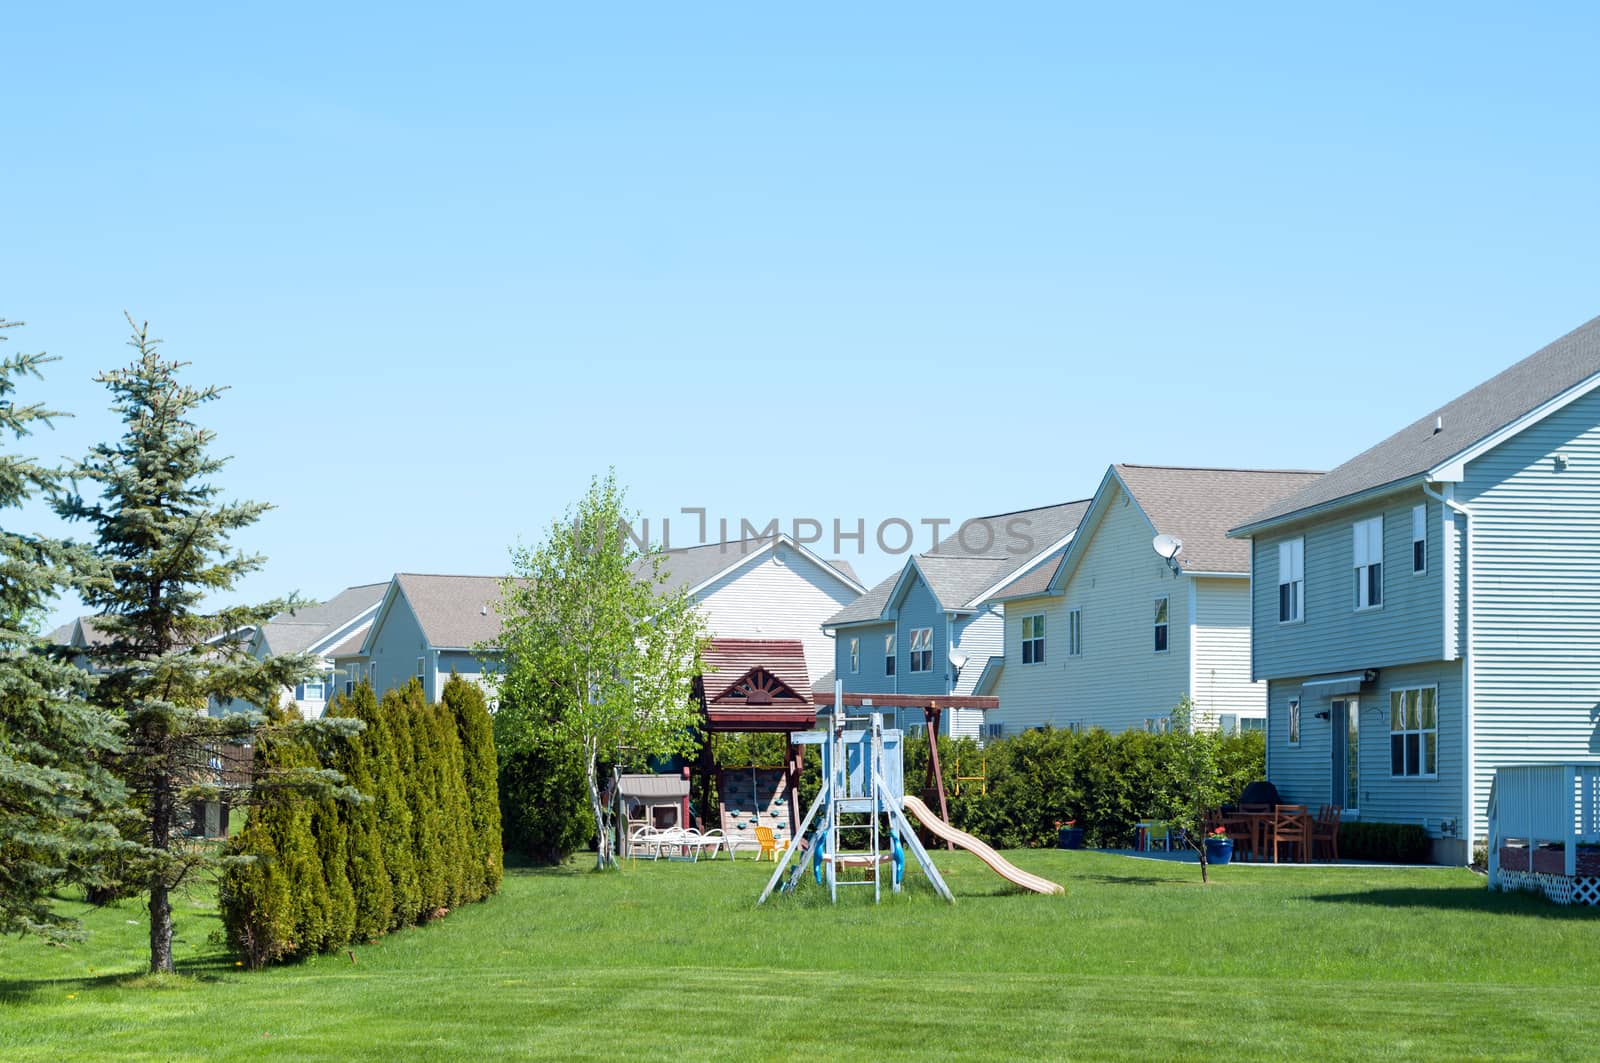 A typical American backyard with child playground by daoleduc